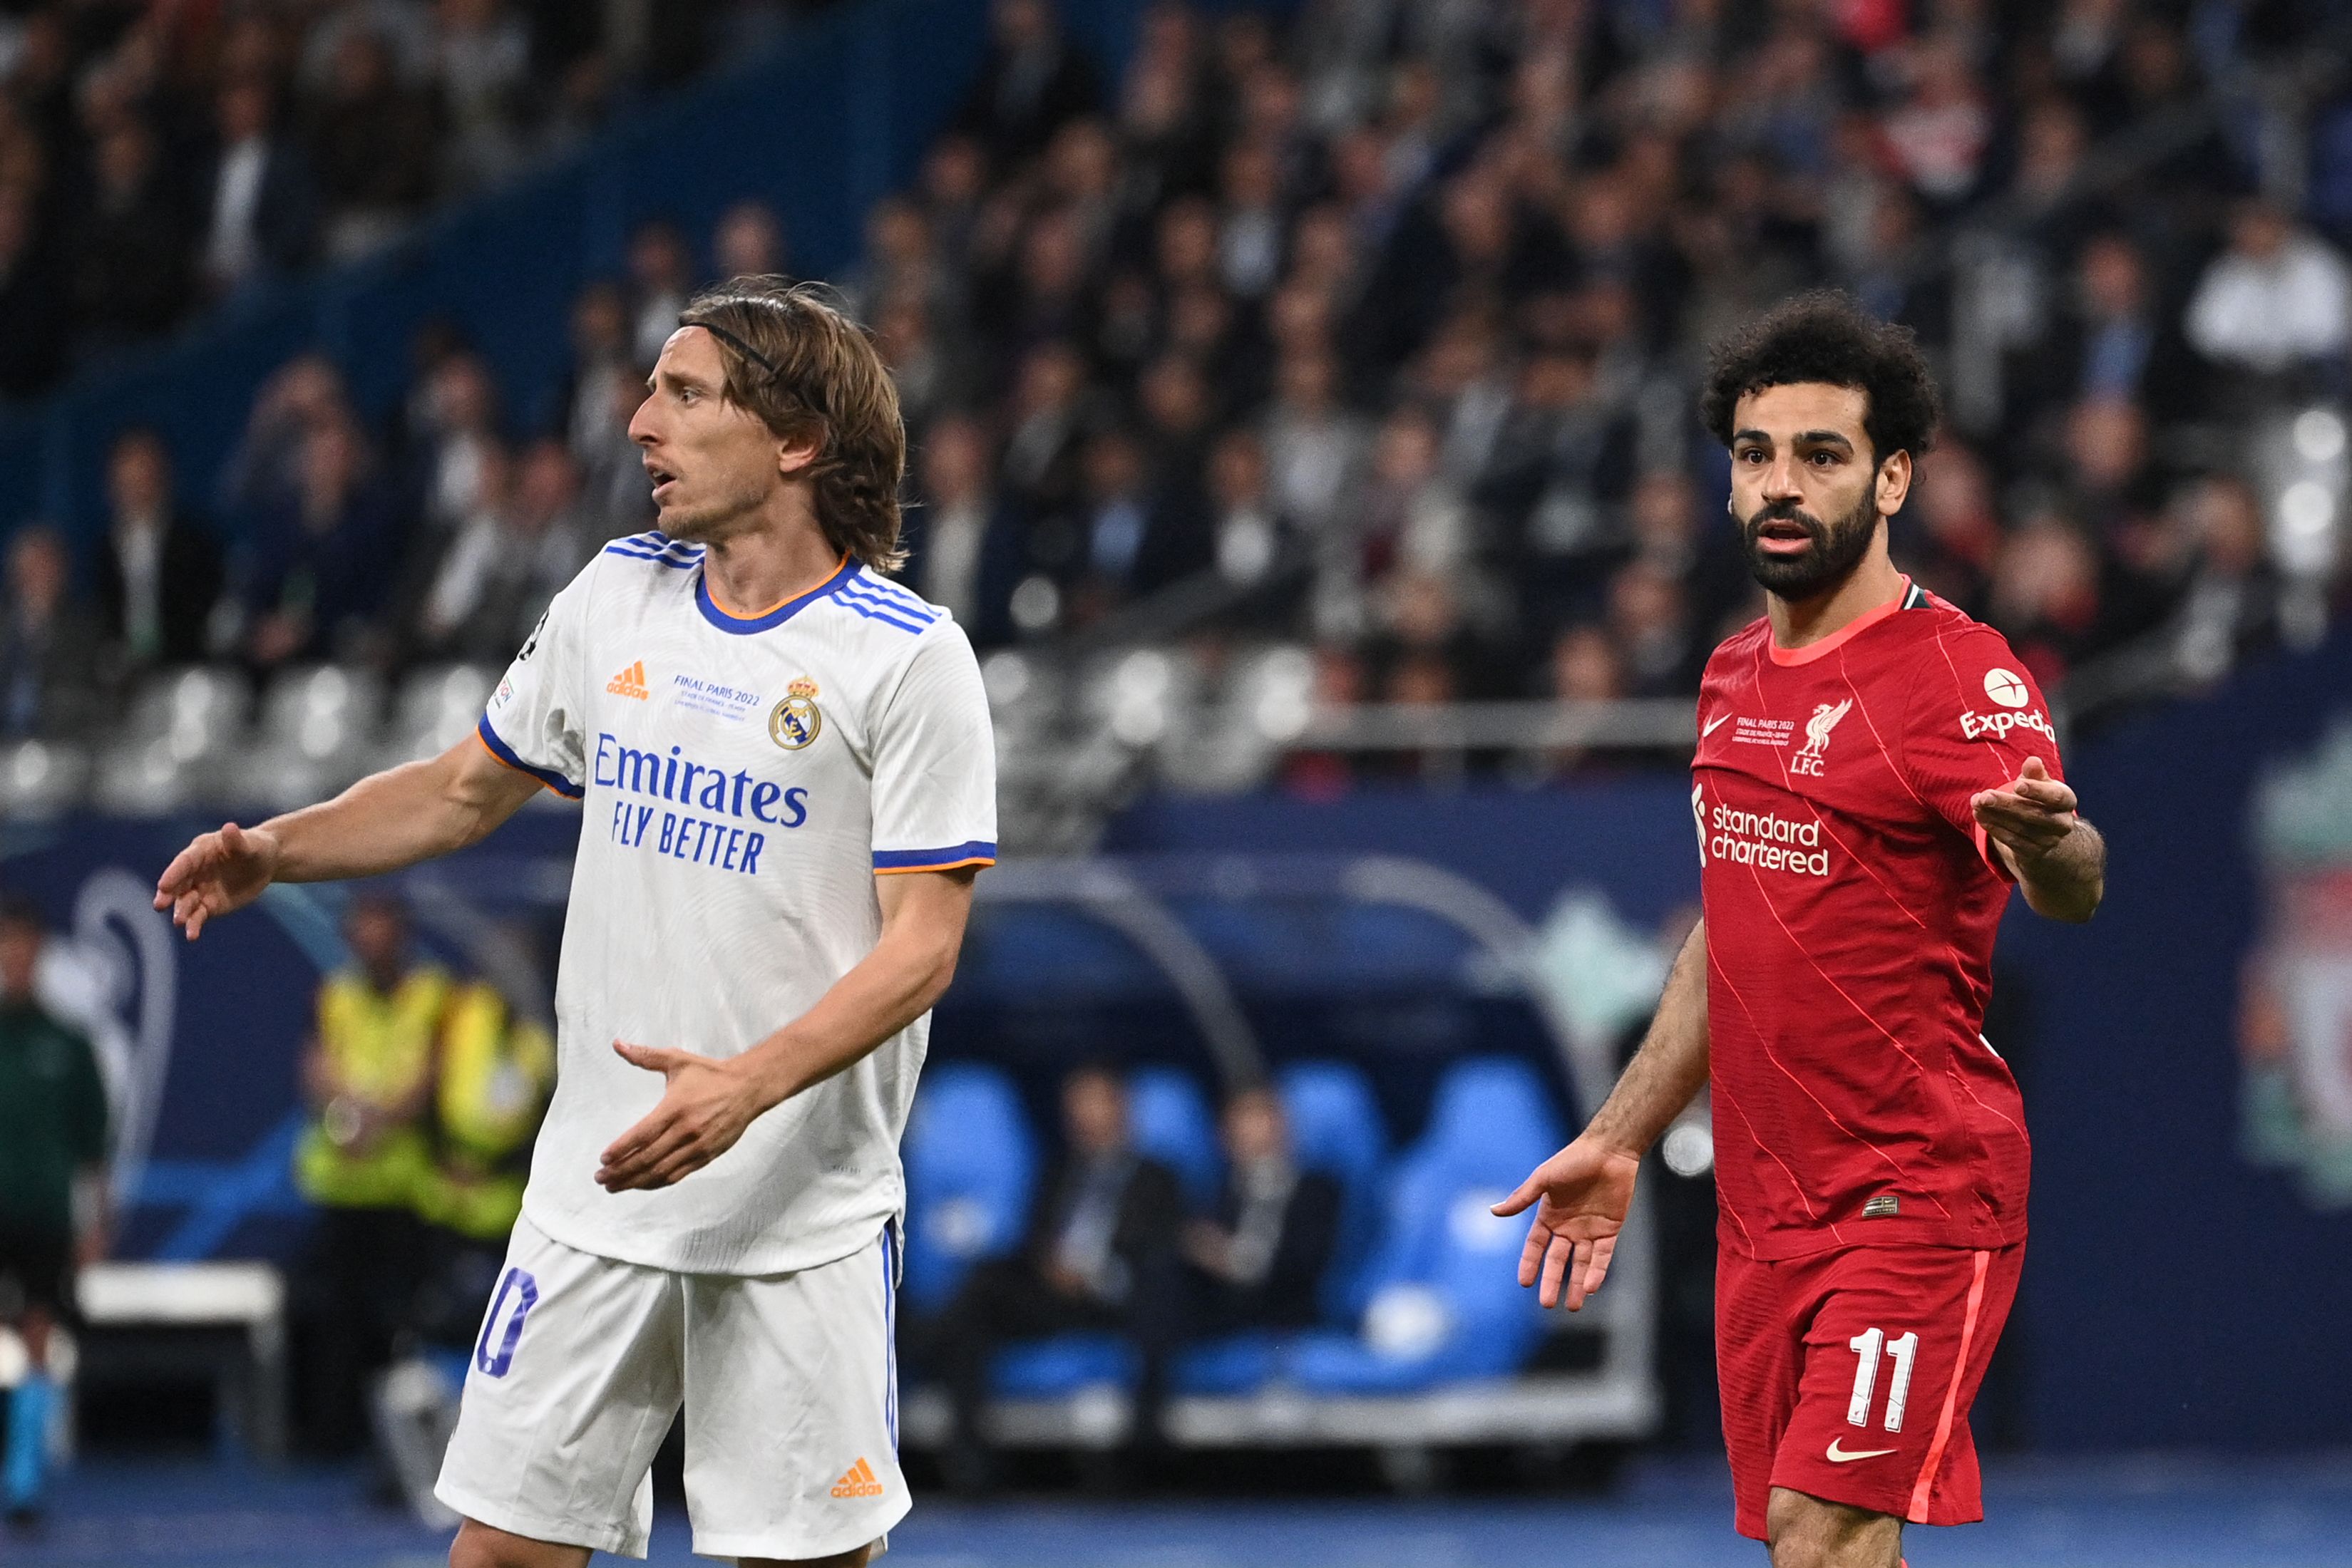 What Modric told Salah after UCL final defeat could fire Liverpool up ahead of Last 16 clash